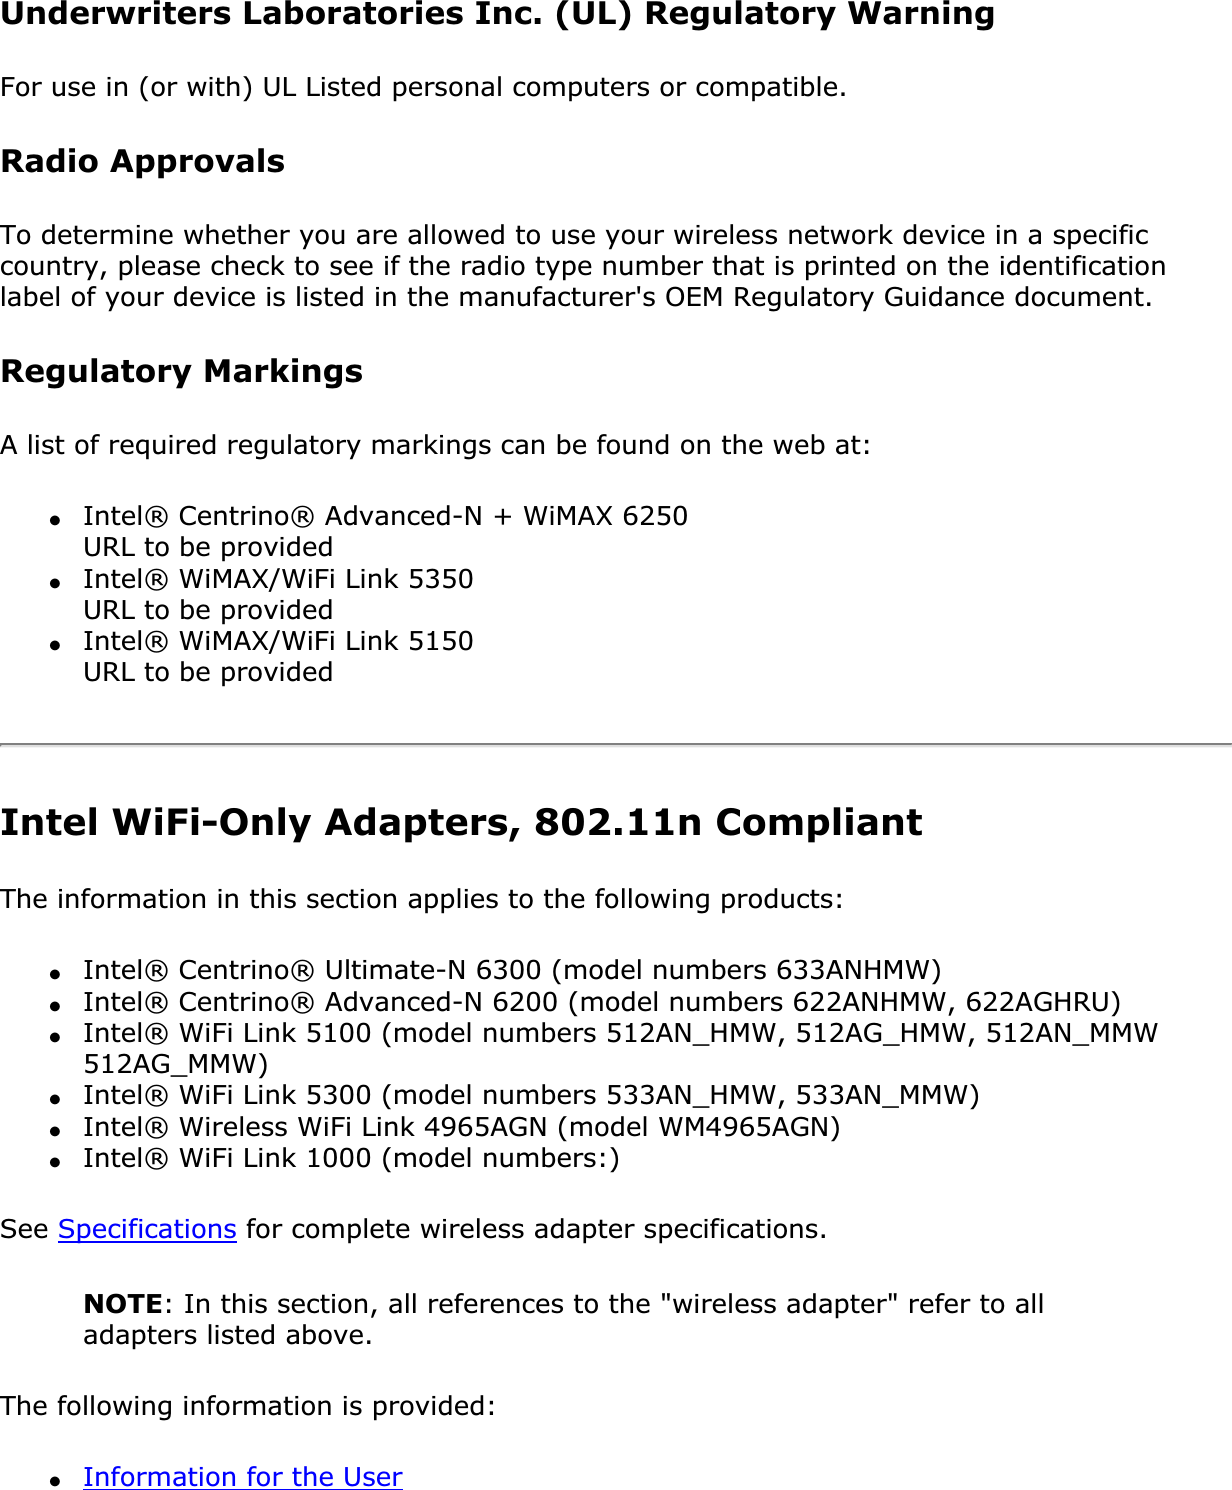 Underwriters Laboratories Inc. (UL) Regulatory WarningFor use in (or with) UL Listed personal computers or compatible.Radio ApprovalsTo determine whether you are allowed to use your wireless network device in a specific country, please check to see if the radio type number that is printed on the identification label of your device is listed in the manufacturer&apos;s OEM Regulatory Guidance document.Regulatory MarkingsA list of required regulatory markings can be found on the web at:●Intel® Centrino® Advanced-N + WiMAX 6250 URL to be provided ●Intel® WiMAX/WiFi Link 5350 URL to be provided ●Intel® WiMAX/WiFi Link 5150 URL to be providedIntel WiFi-Only Adapters, 802.11n Compliant The information in this section applies to the following products:●Intel® Centrino® Ultimate-N 6300 (model numbers 633ANHMW)●Intel® Centrino® Advanced-N 6200 (model numbers 622ANHMW, 622AGHRU)●Intel® WiFi Link 5100 (model numbers 512AN_HMW, 512AG_HMW, 512AN_MMW 512AG_MMW)●Intel® WiFi Link 5300 (model numbers 533AN_HMW, 533AN_MMW)●Intel® Wireless WiFi Link 4965AGN (model WM4965AGN)●Intel® WiFi Link 1000 (model numbers:) See Specifications for complete wireless adapter specifications. NOTE: In this section, all references to the &quot;wireless adapter&quot; refer to all adapters listed above.The following information is provided: ●Information for the User